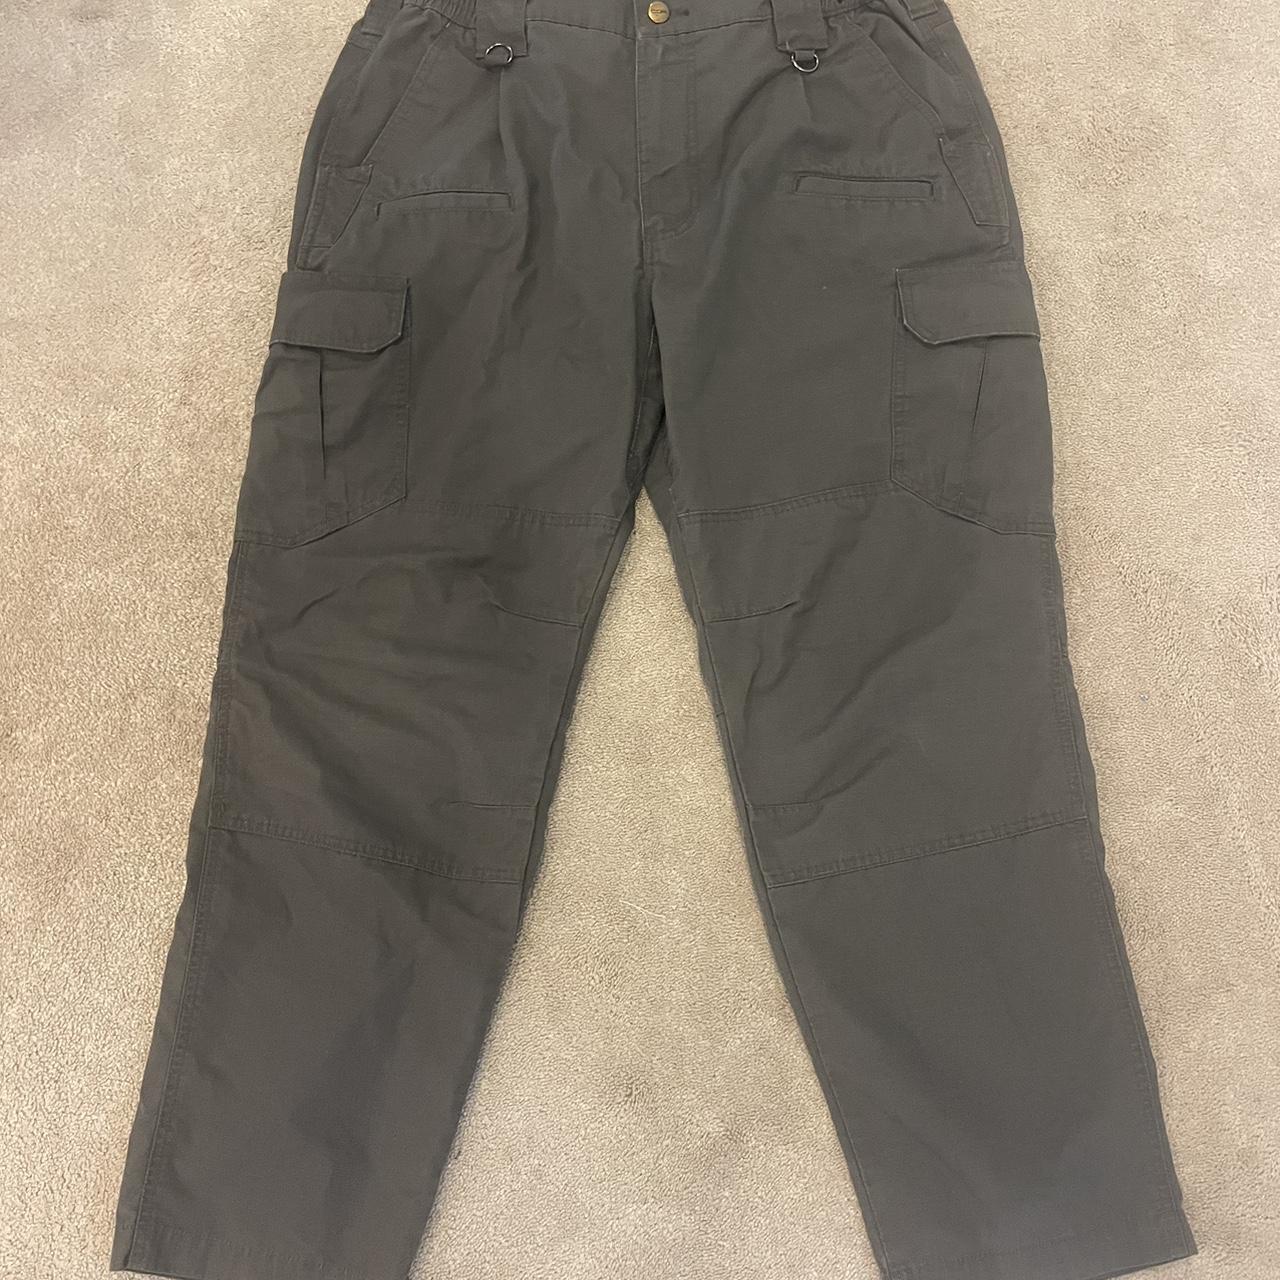 Baggy CQR cargo pants. In perfect condition. Such a... - Depop